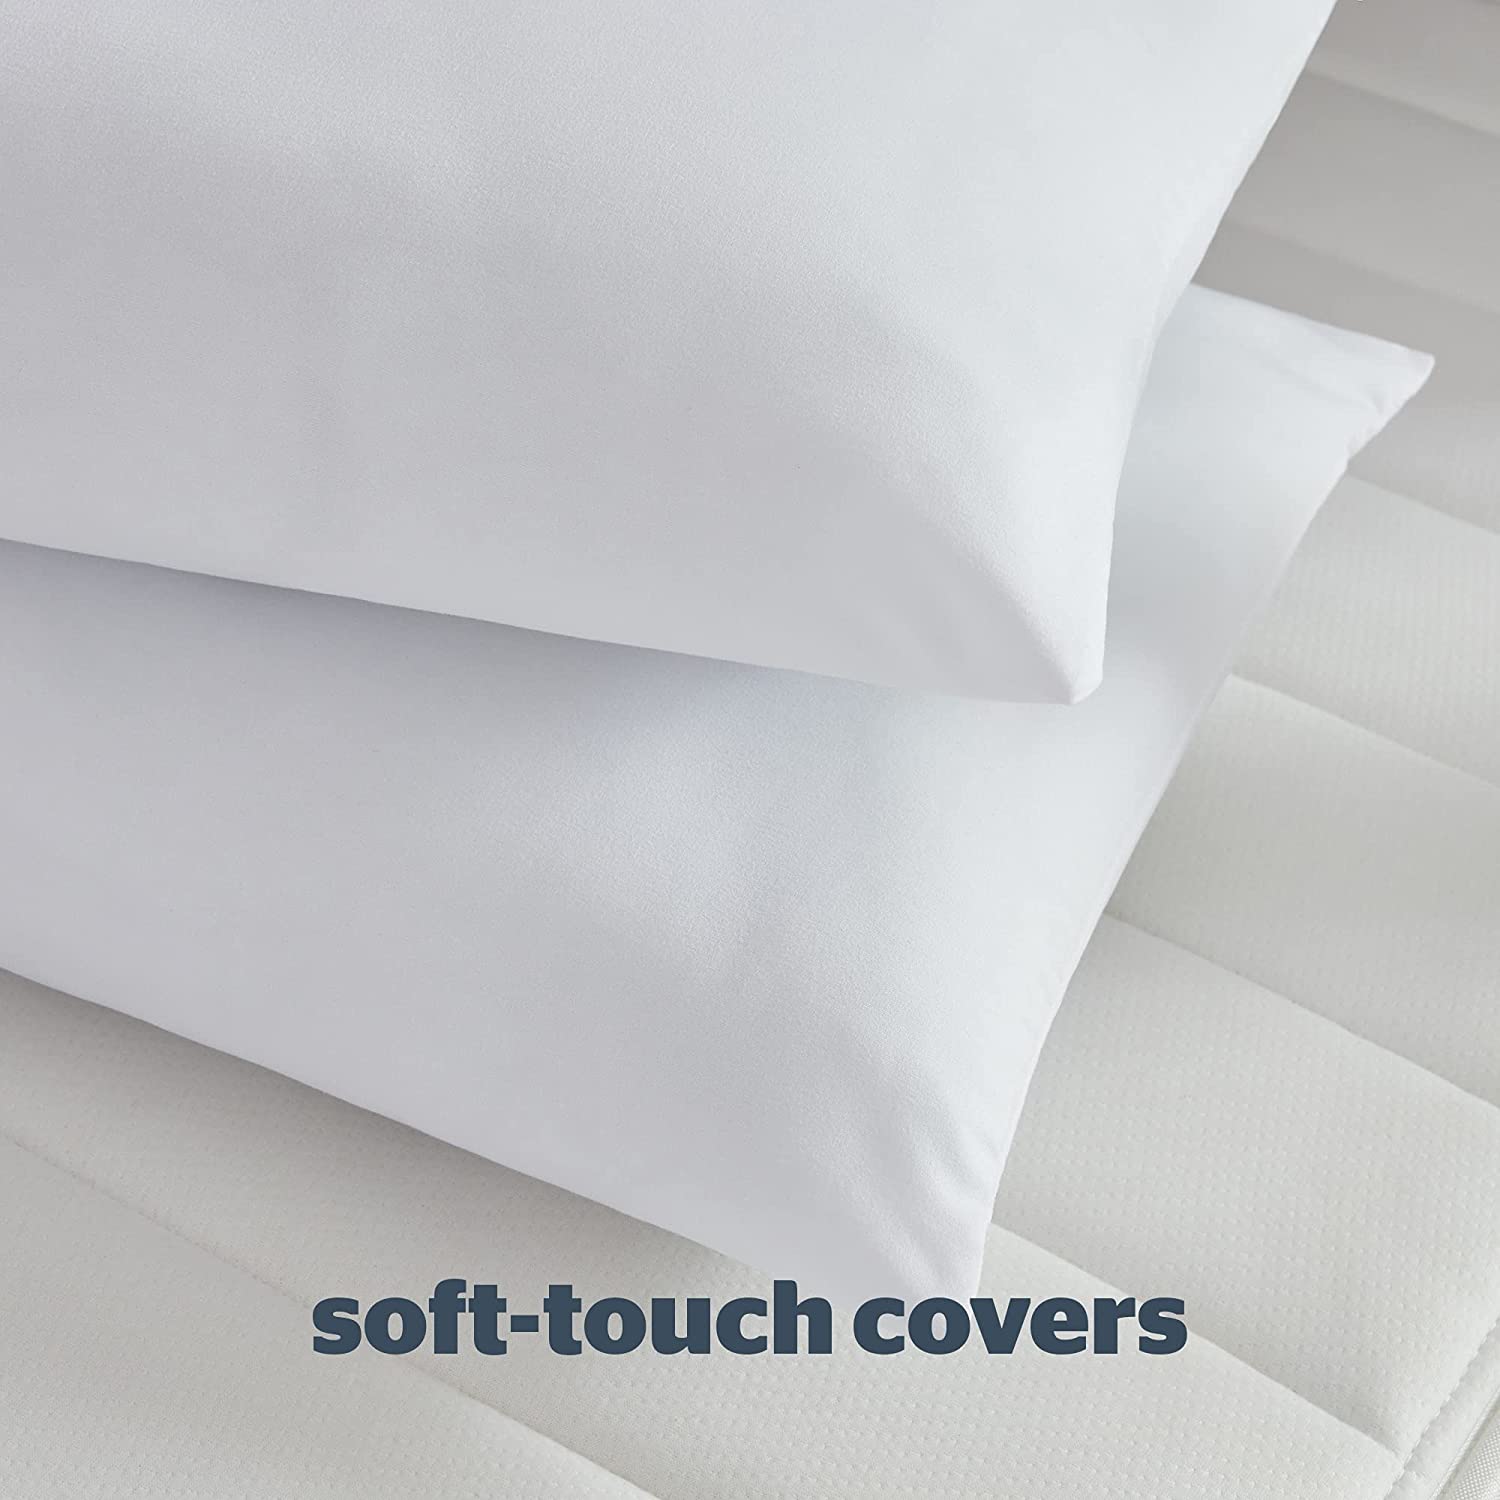 Pillows Pack of 4 – Medium Support Soft Bouncy Hotel Bed Pillows 4 Pack 3